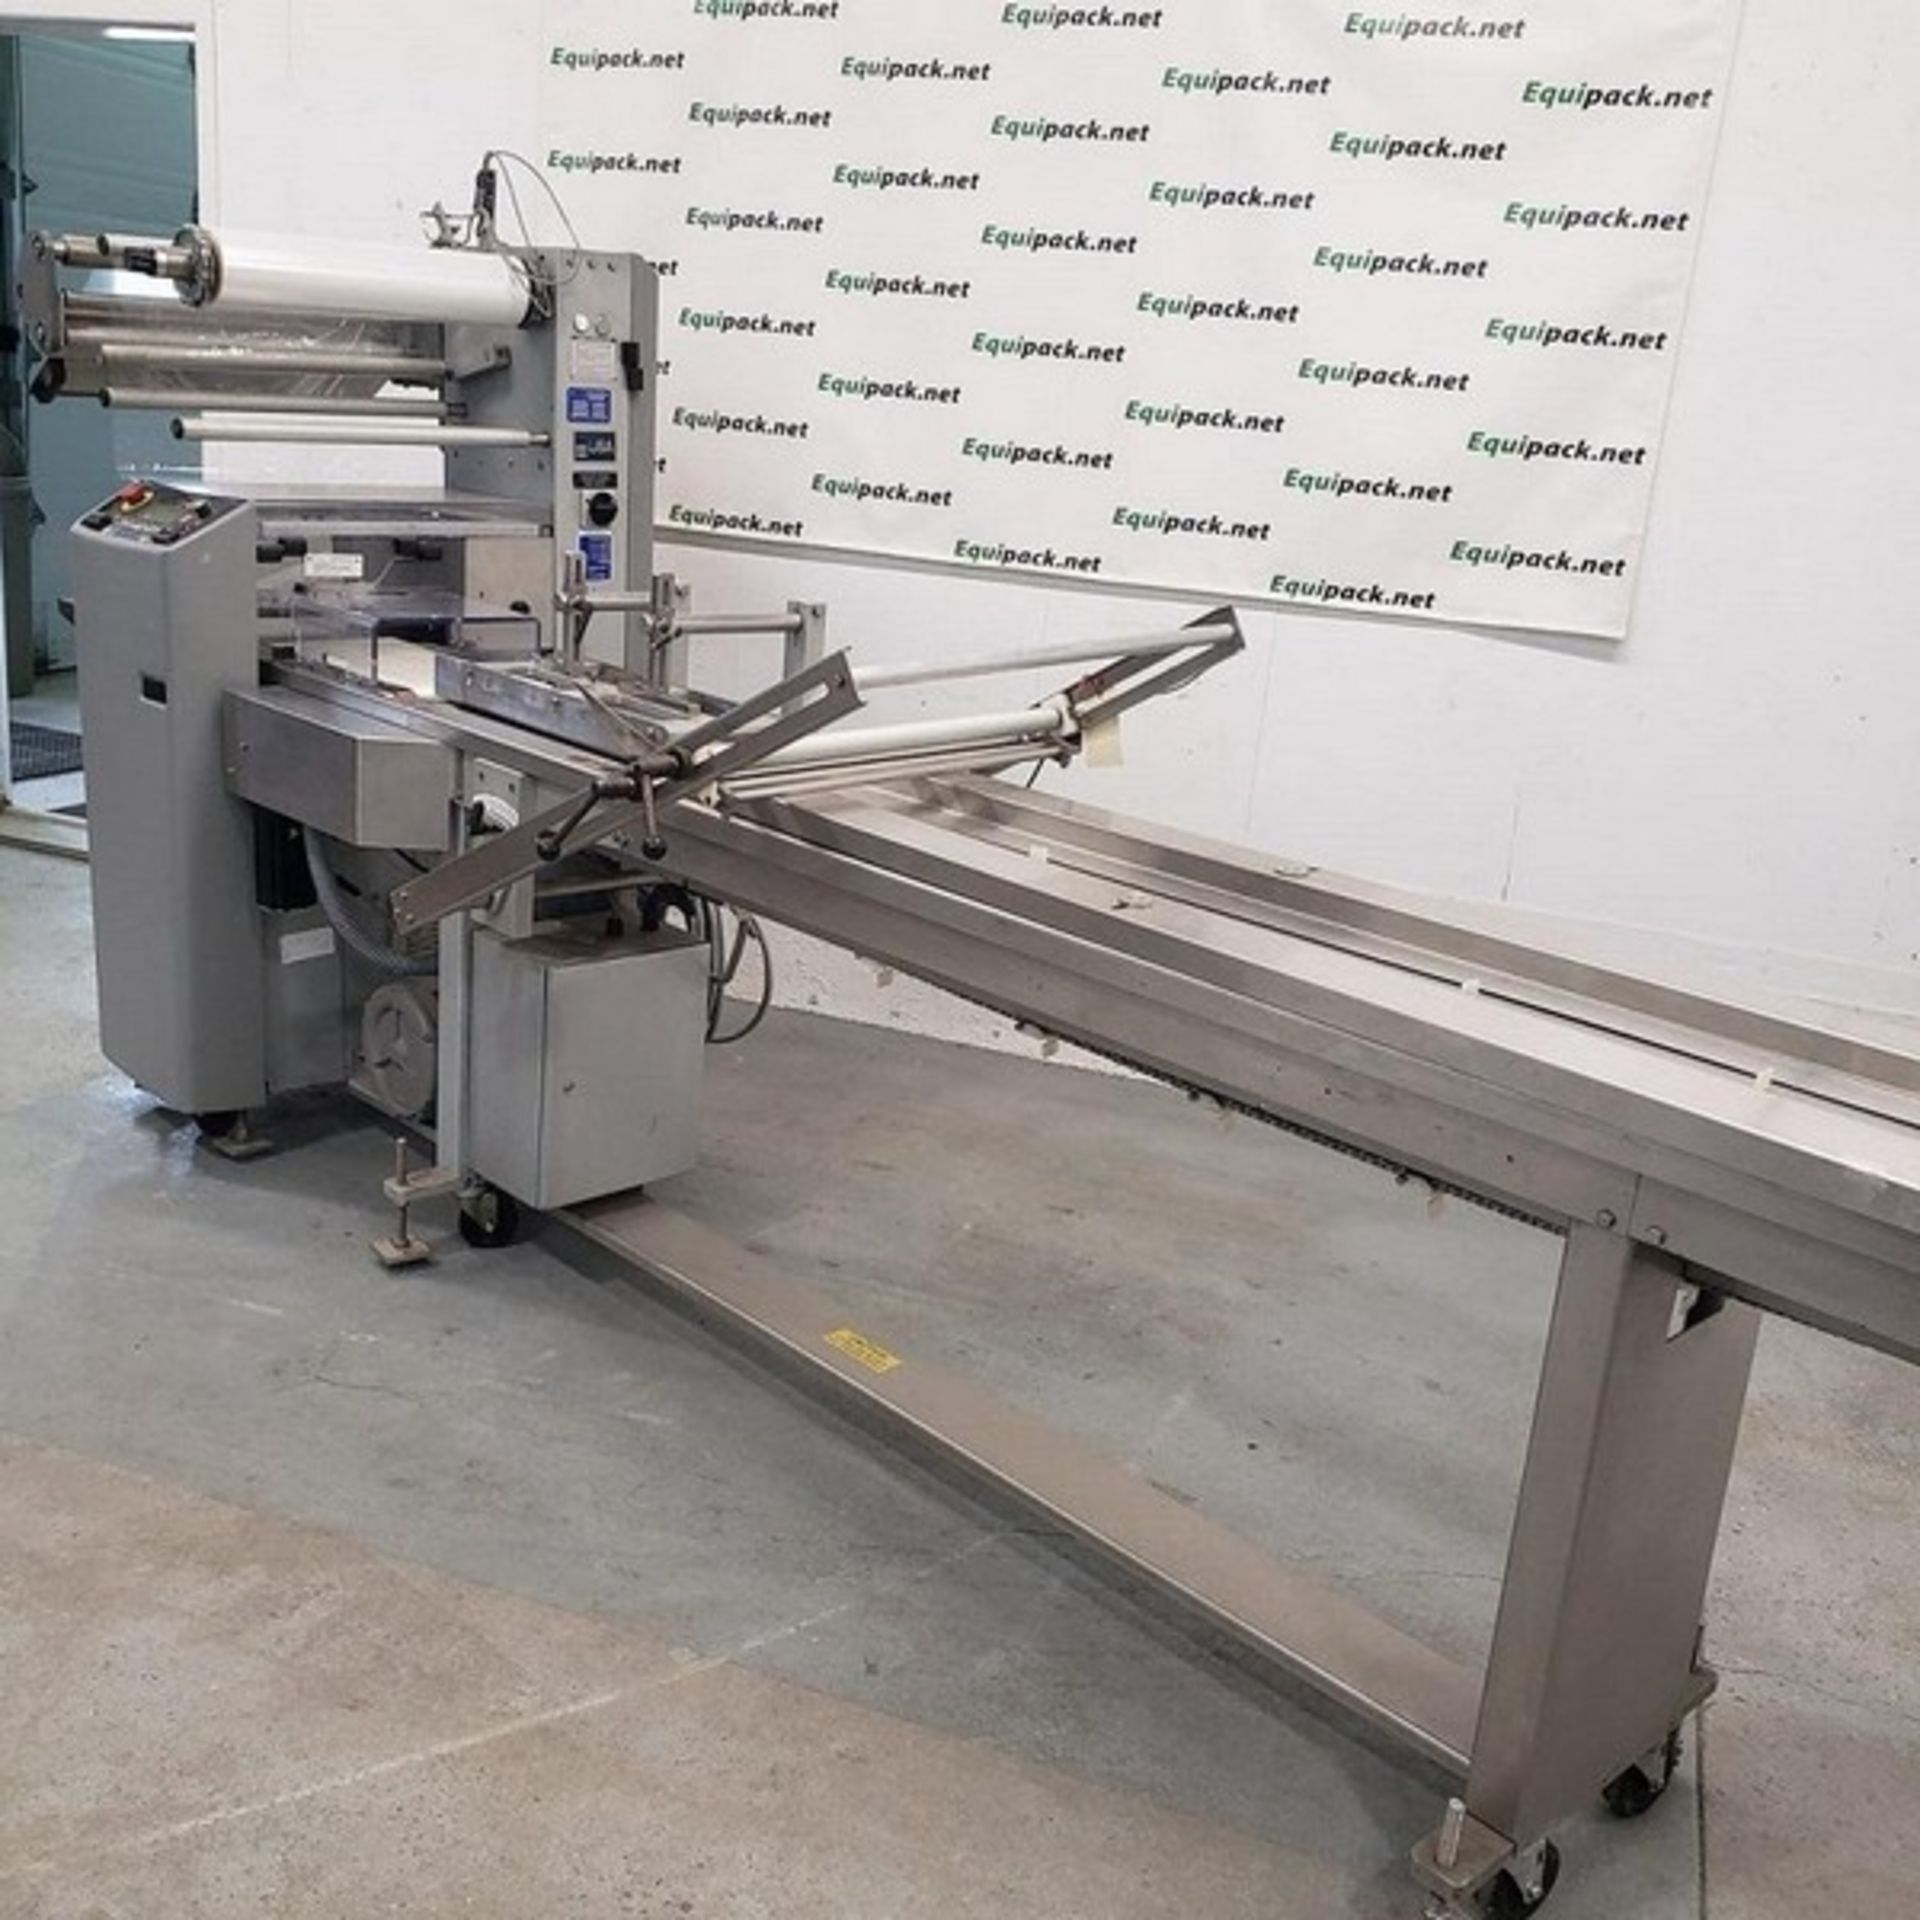 Doboy Model Stratus Horizontal Flow Wrapper, food and cosmetical grade, up to 50 packages per minute - Image 2 of 7